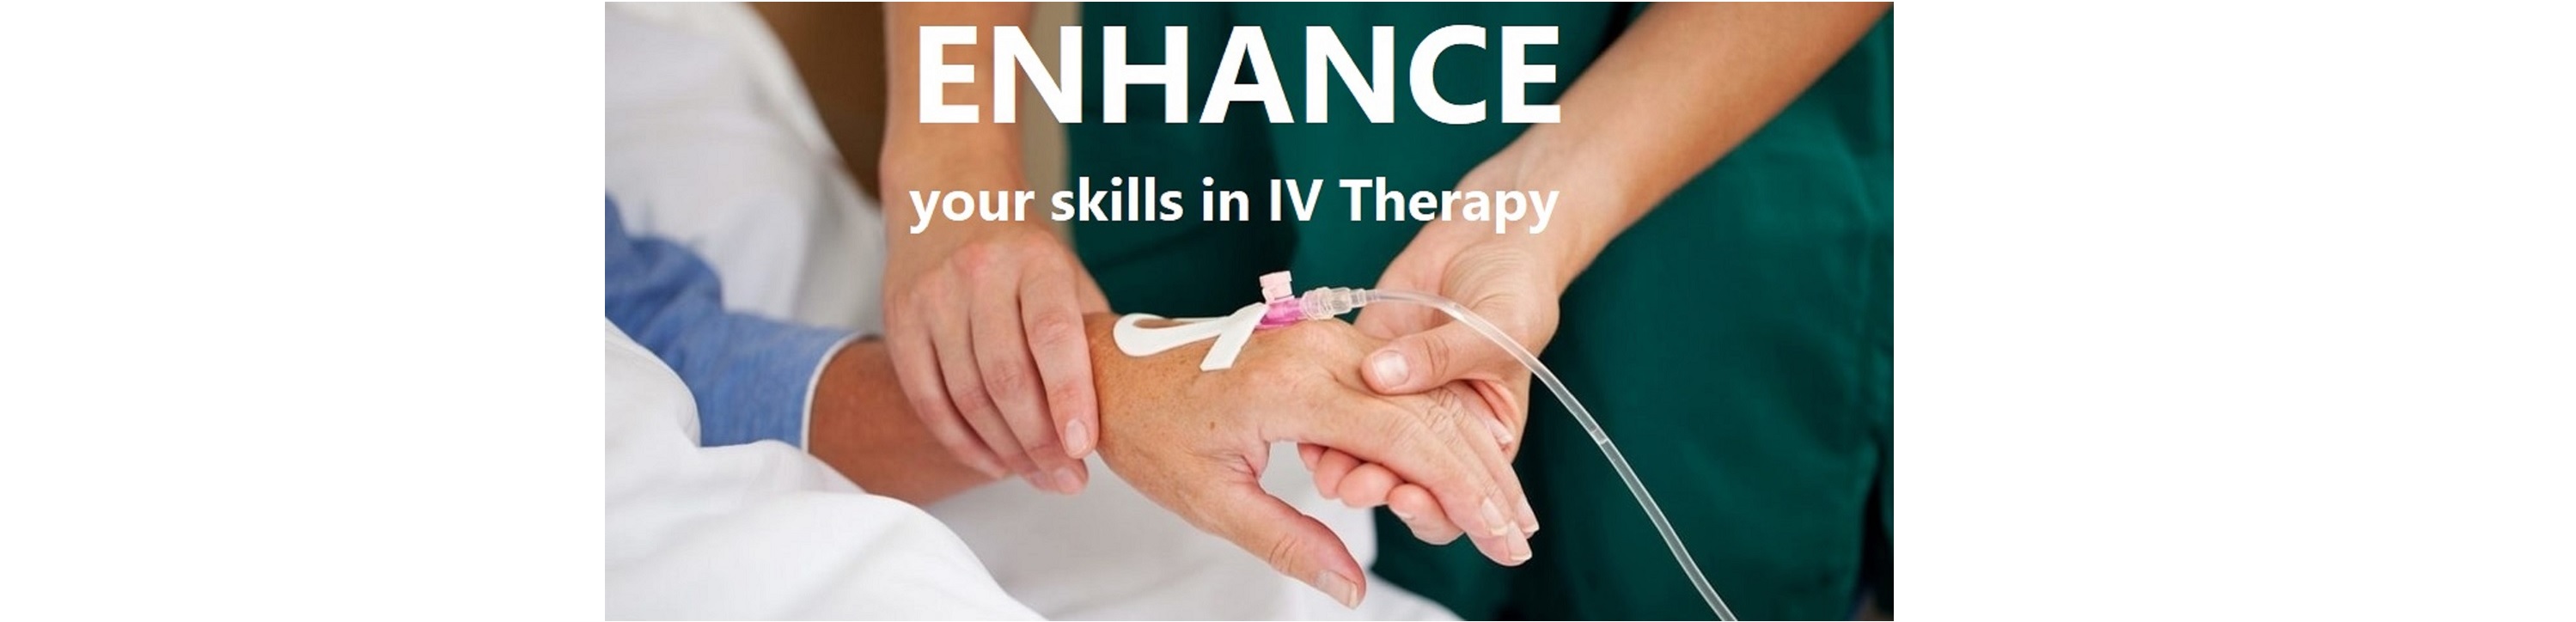 IV Therapy Course - Saturday, October 19, 2019 Banner